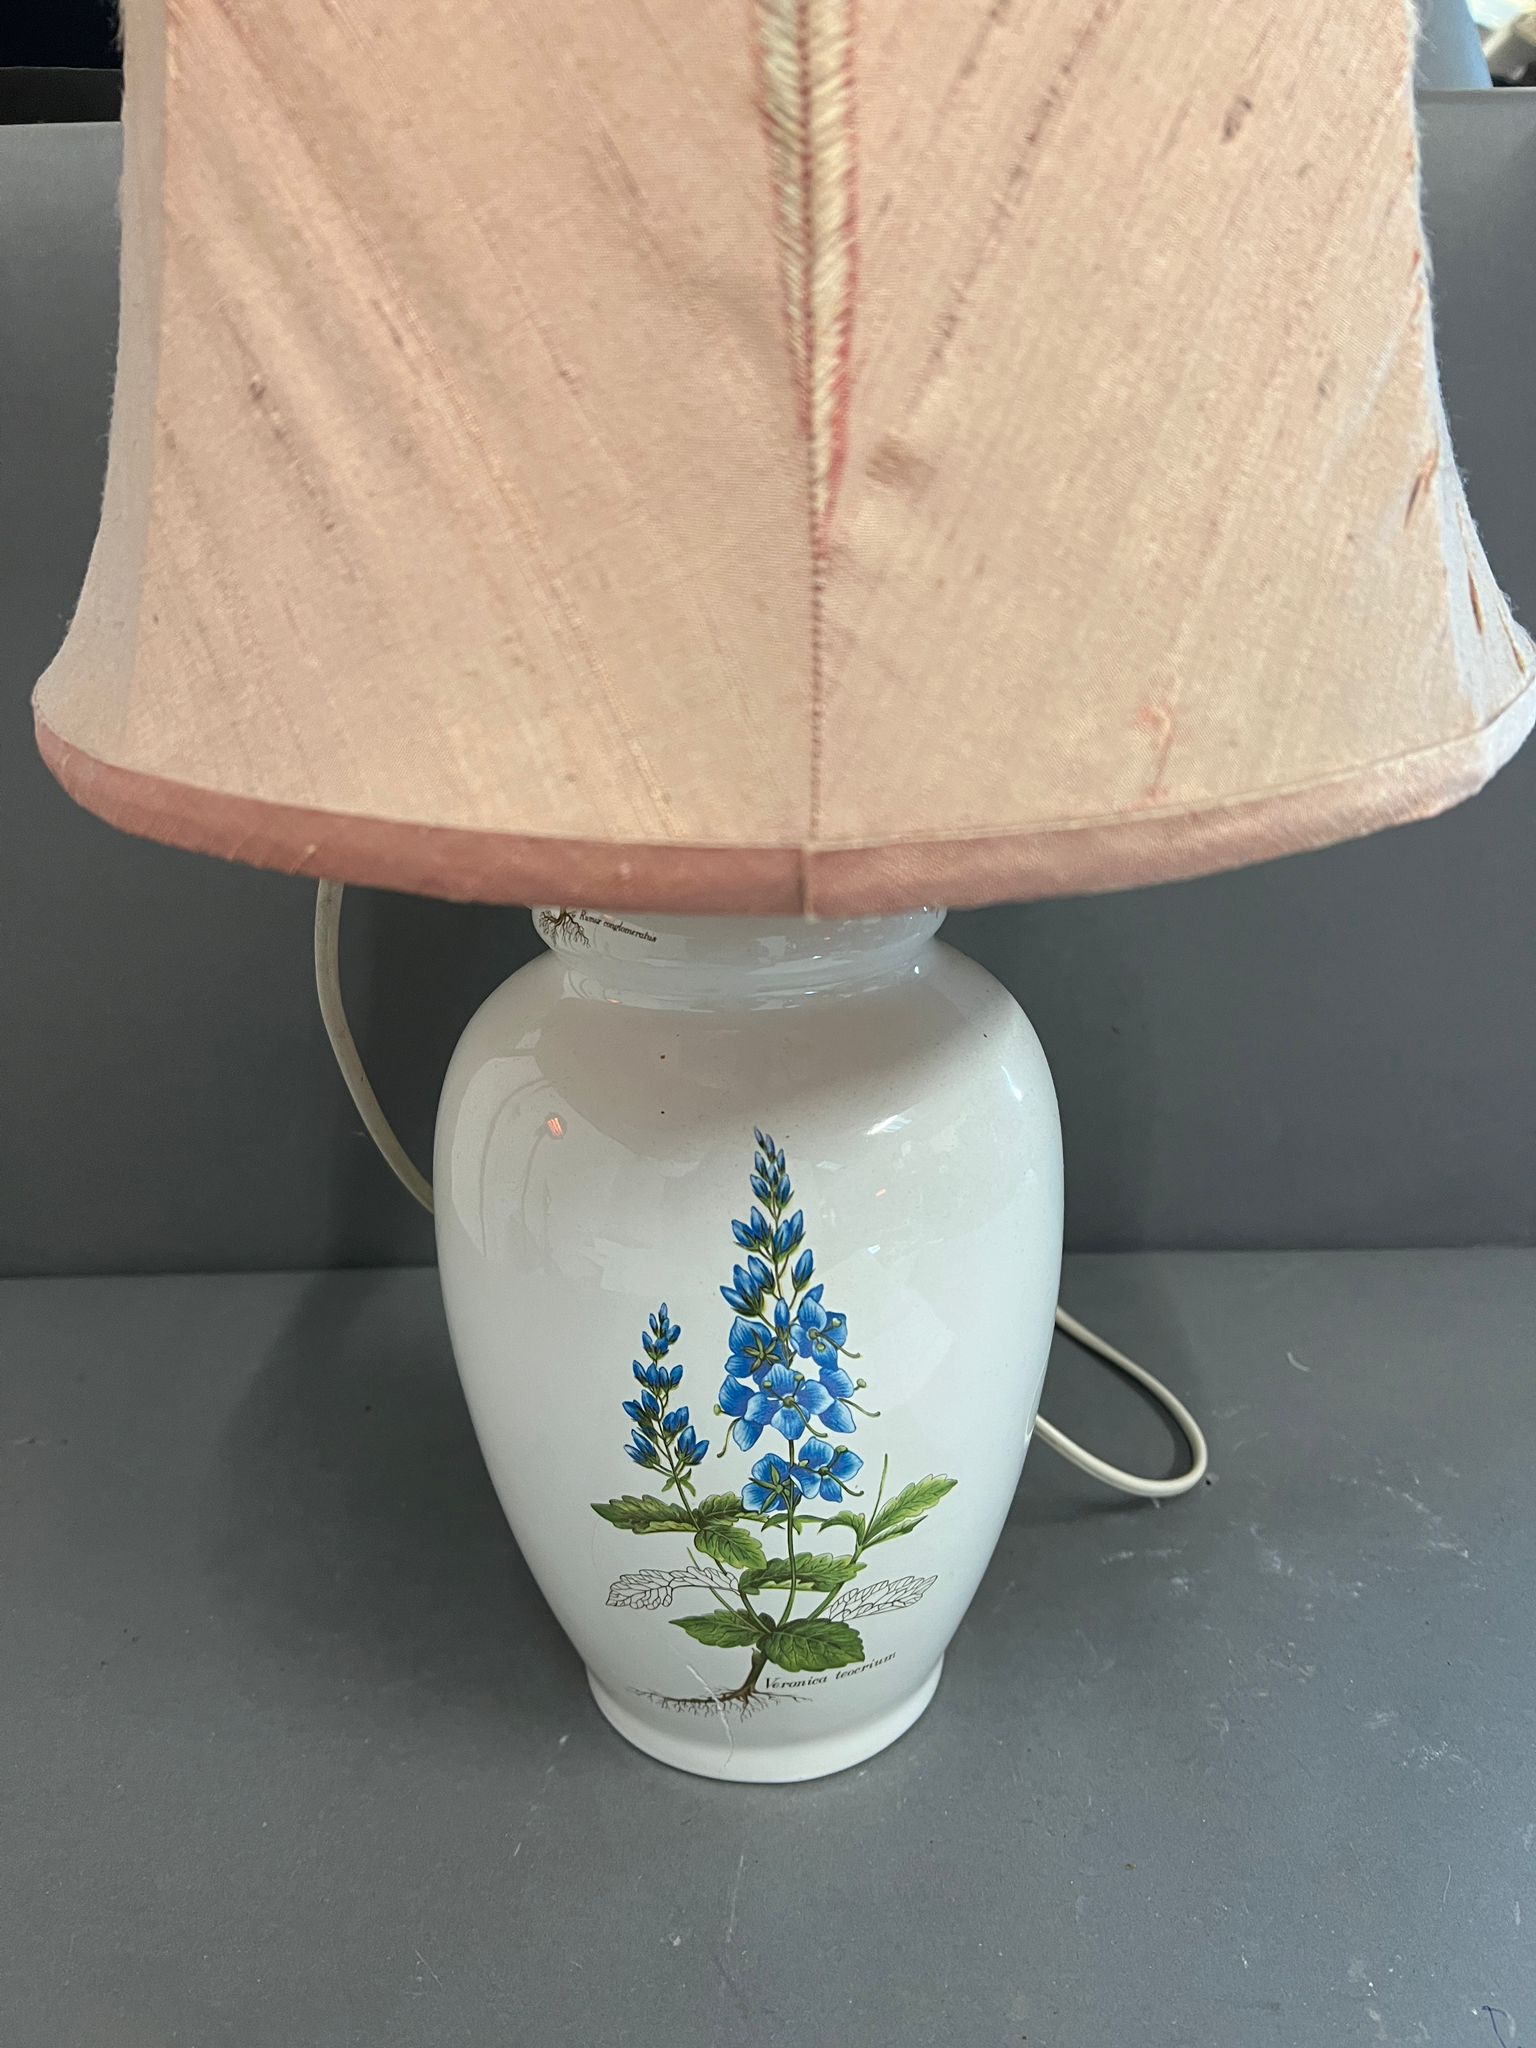 A floral table lamp